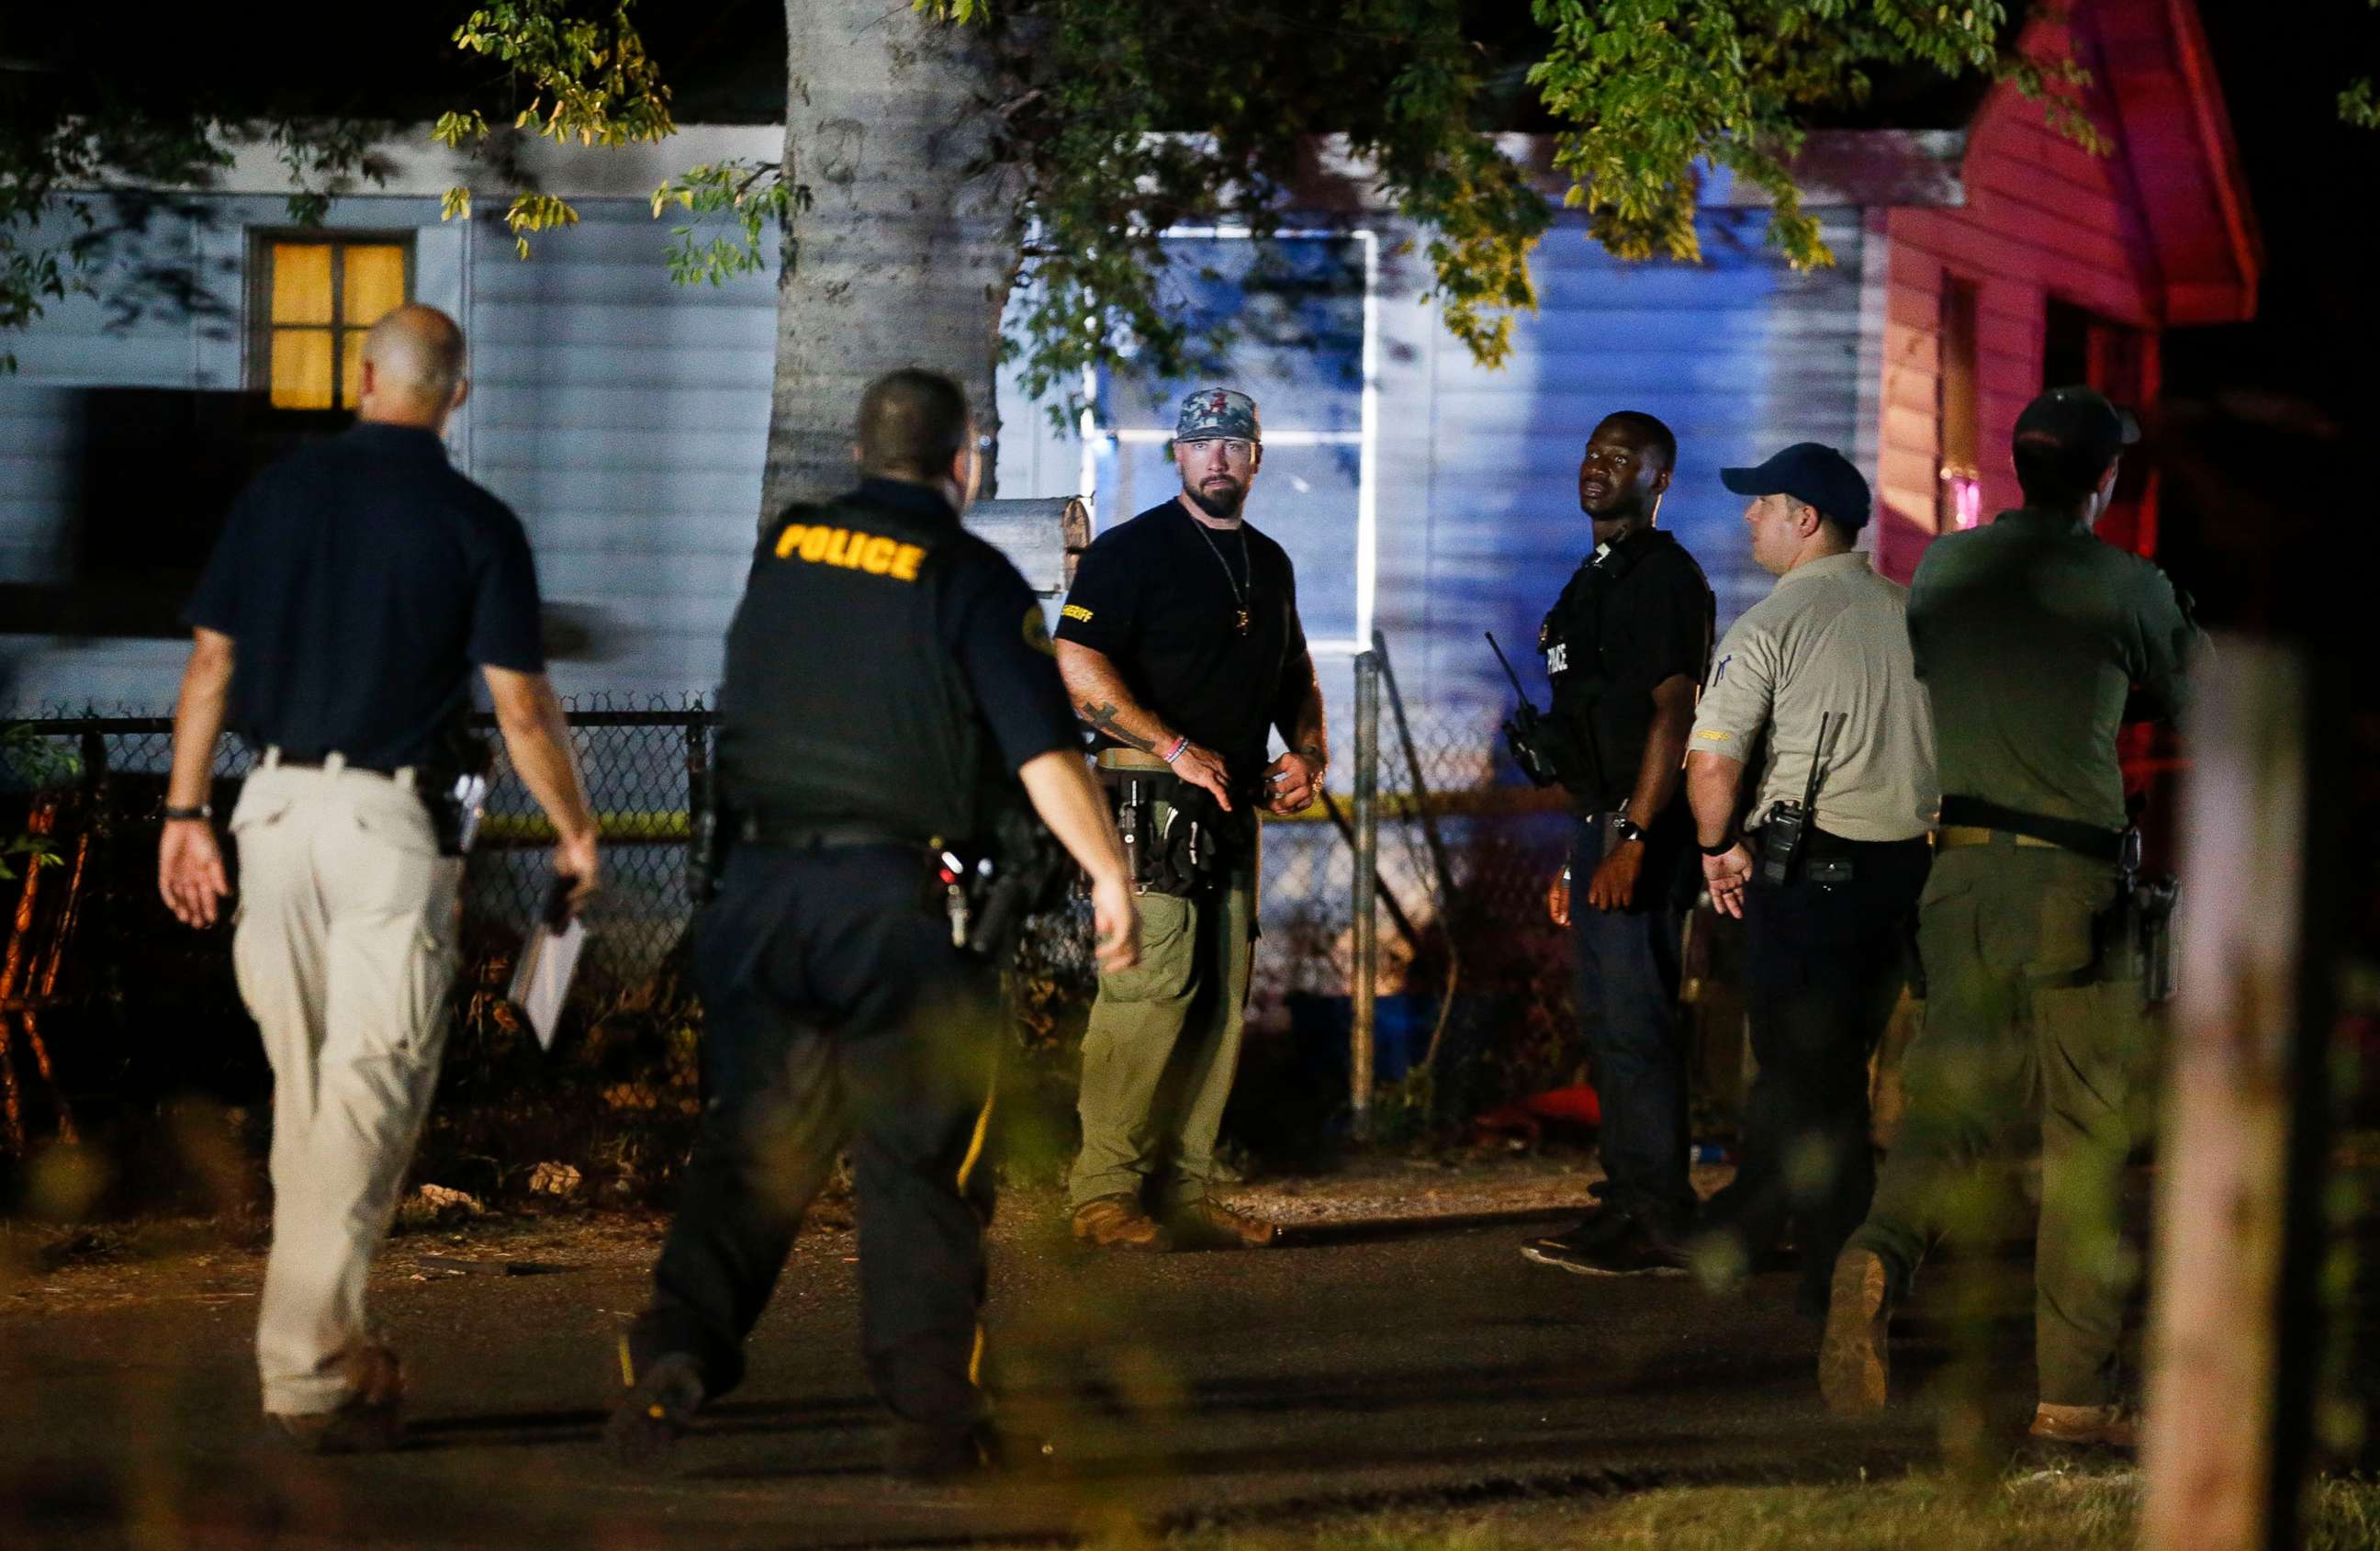 PHOTO: Tuscaloosa Police officers and Tuscaloosa Violent Crimes Unit investigators work at the scene where Tuscaloosa Police Investigator Dornell Cousette, was shot and killed in Tuscaloosa, Ala., Sept. 16, 2019.